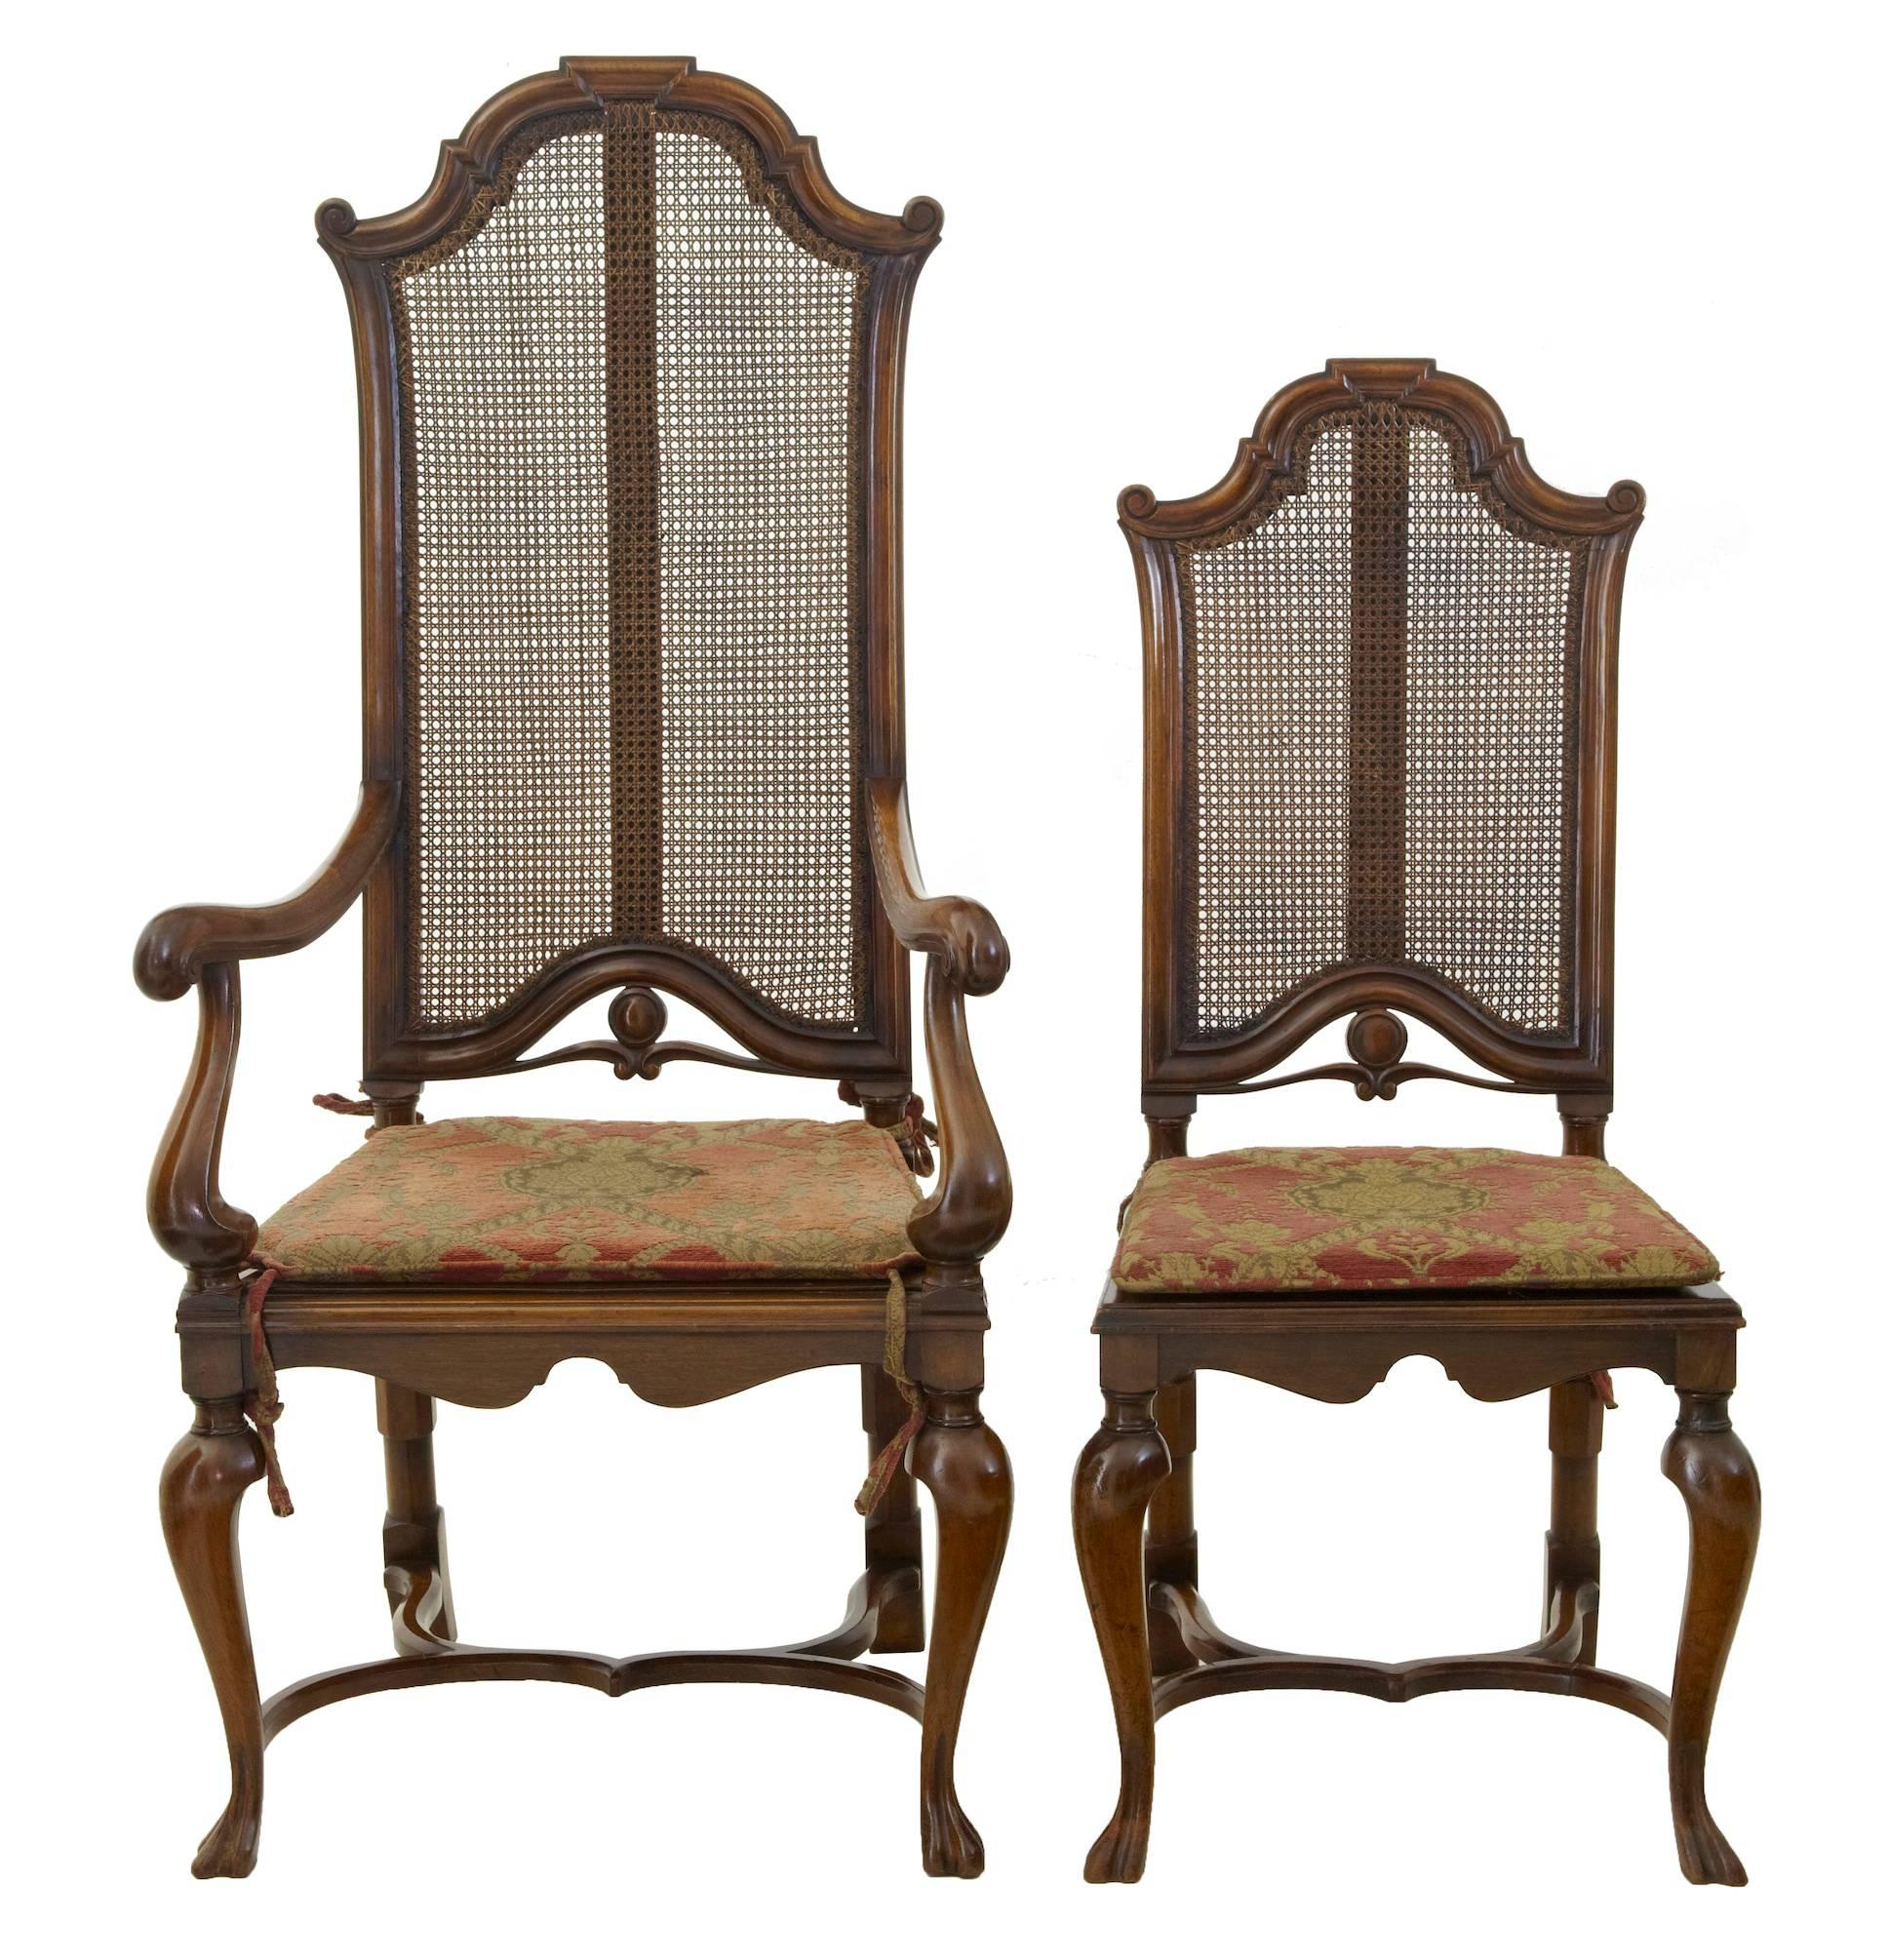 Superb quality set of William and Mary style walnut dining chairs, circa 1895.

Set comprises of two armchairs and six singles.
Beautifully carved all-over, with shaped arms, legs and stretchers.
Cane backs are all in good order, cane work to